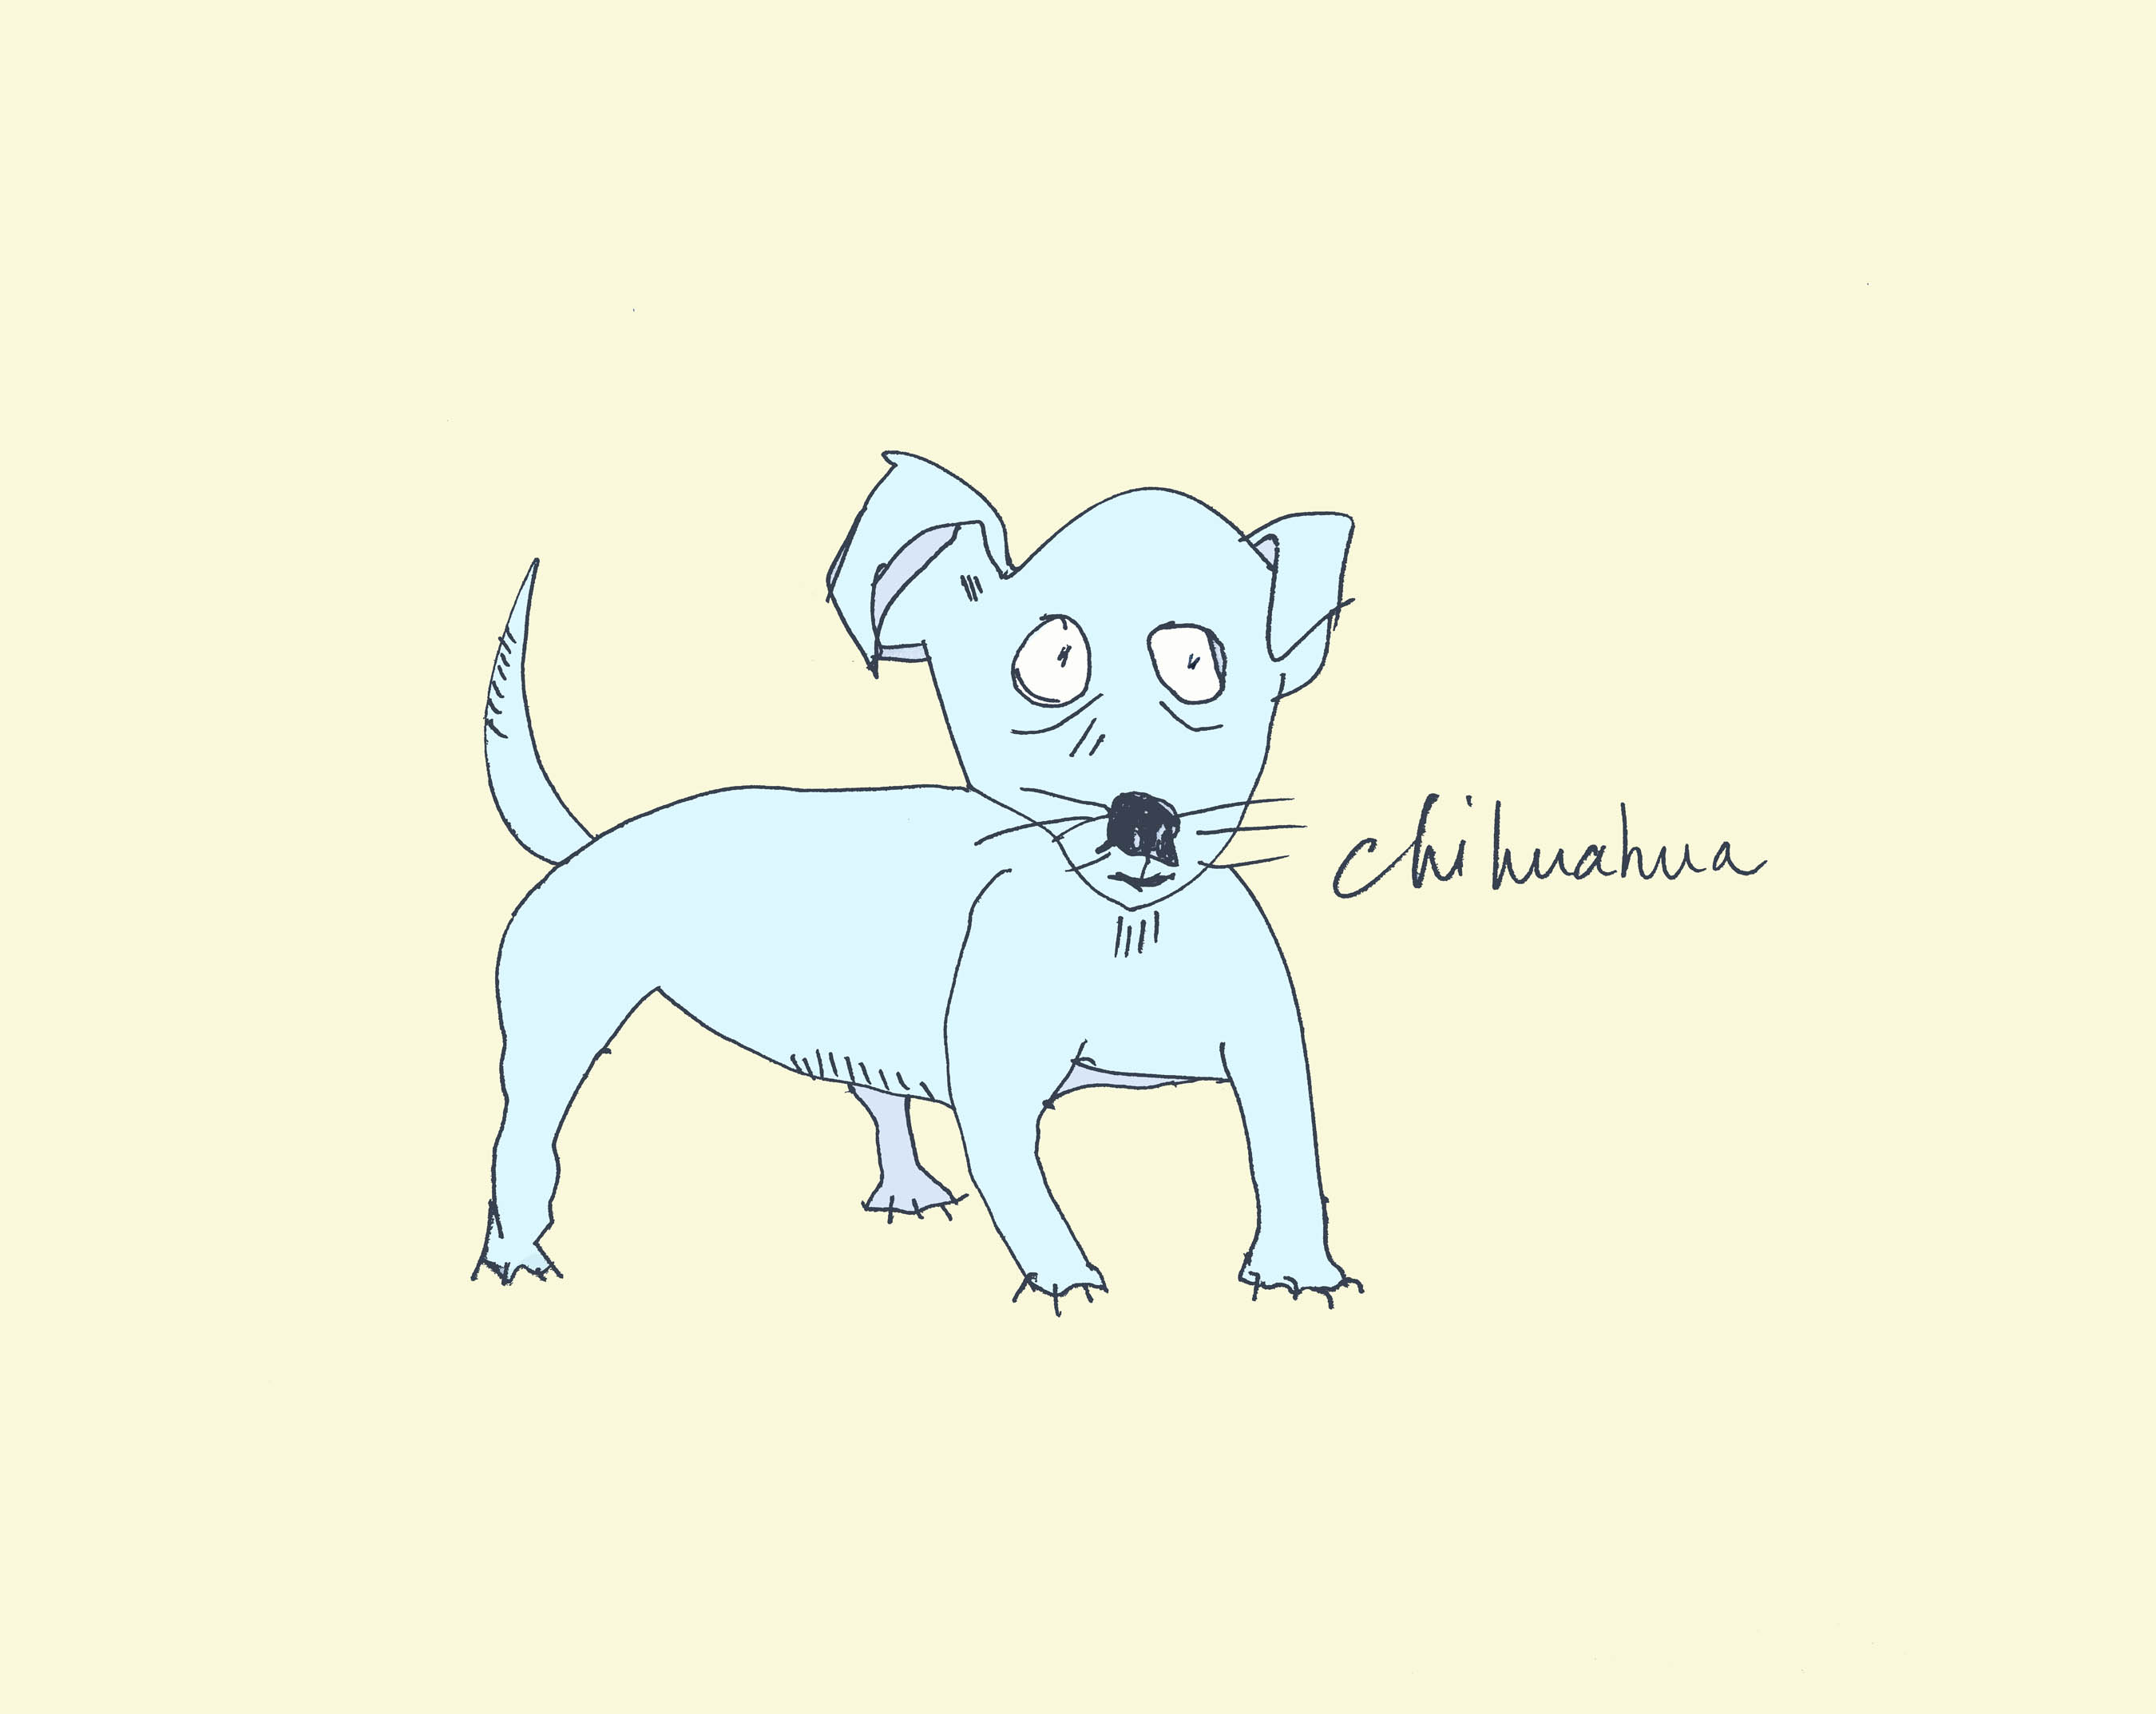 art every day number 419 / illustration / blue chihuahua